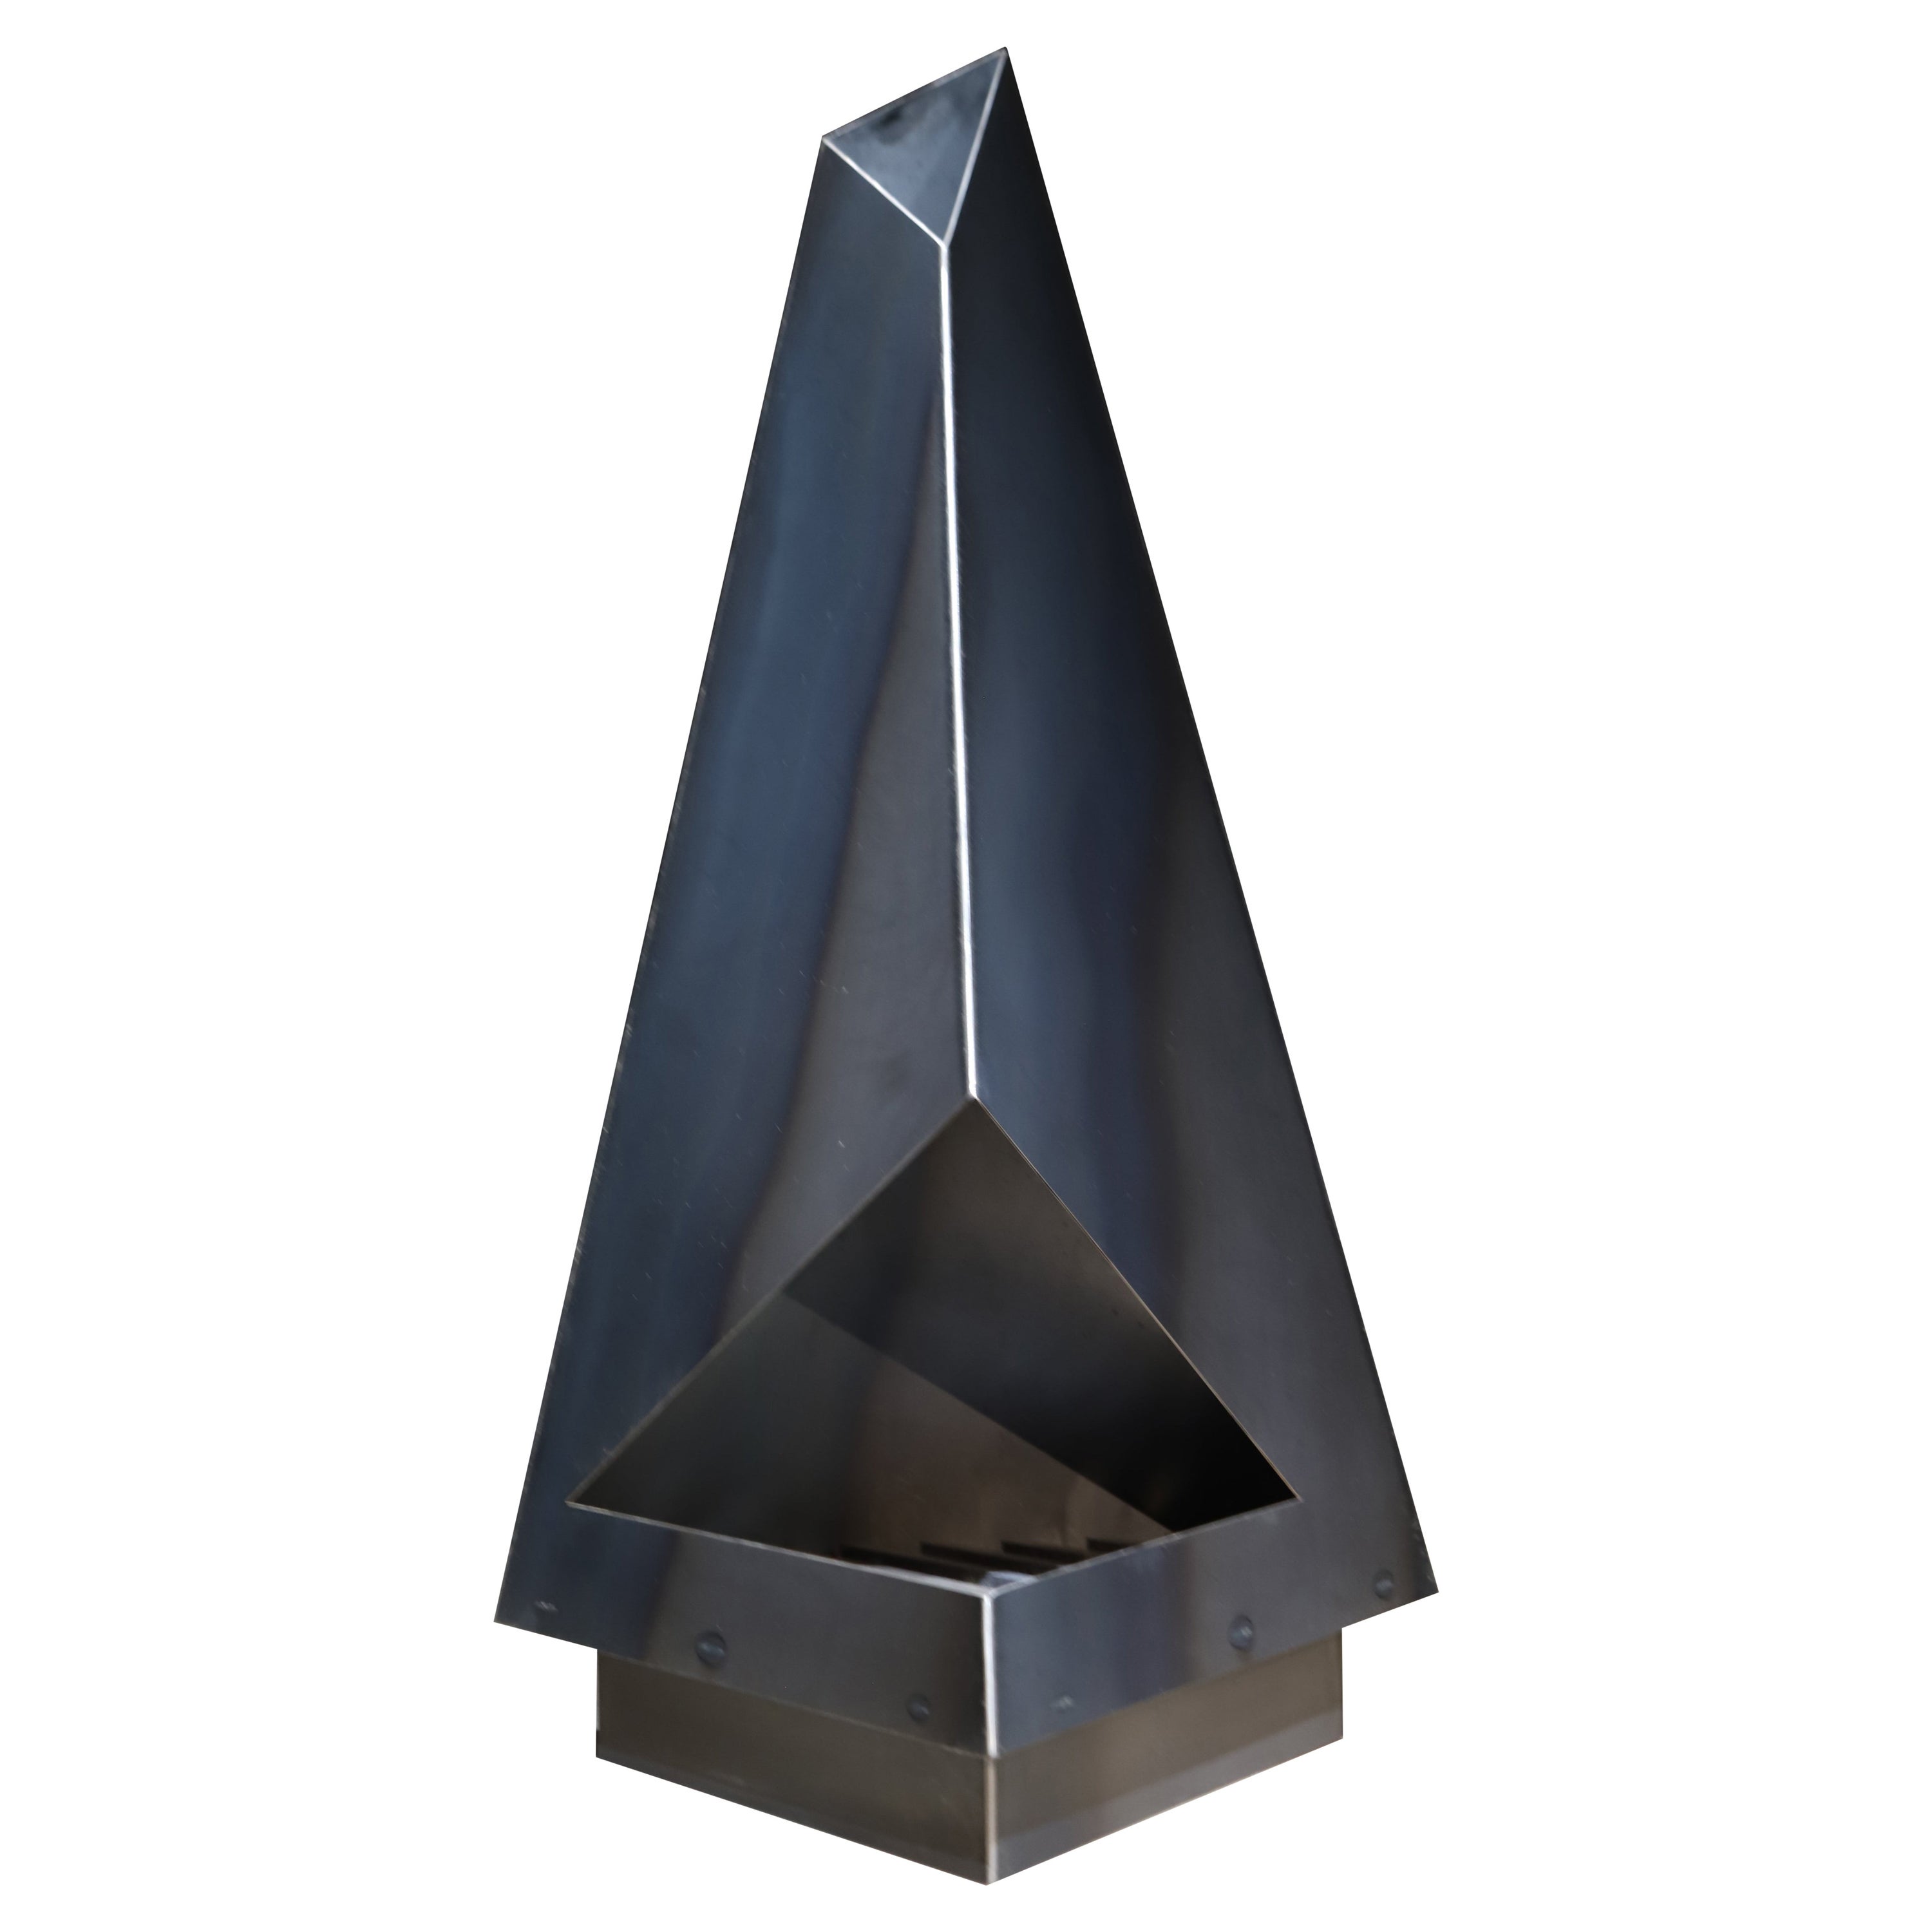 Steel Fire Pit Chiminea Outdoor Fireplace by Koby Knoll Click